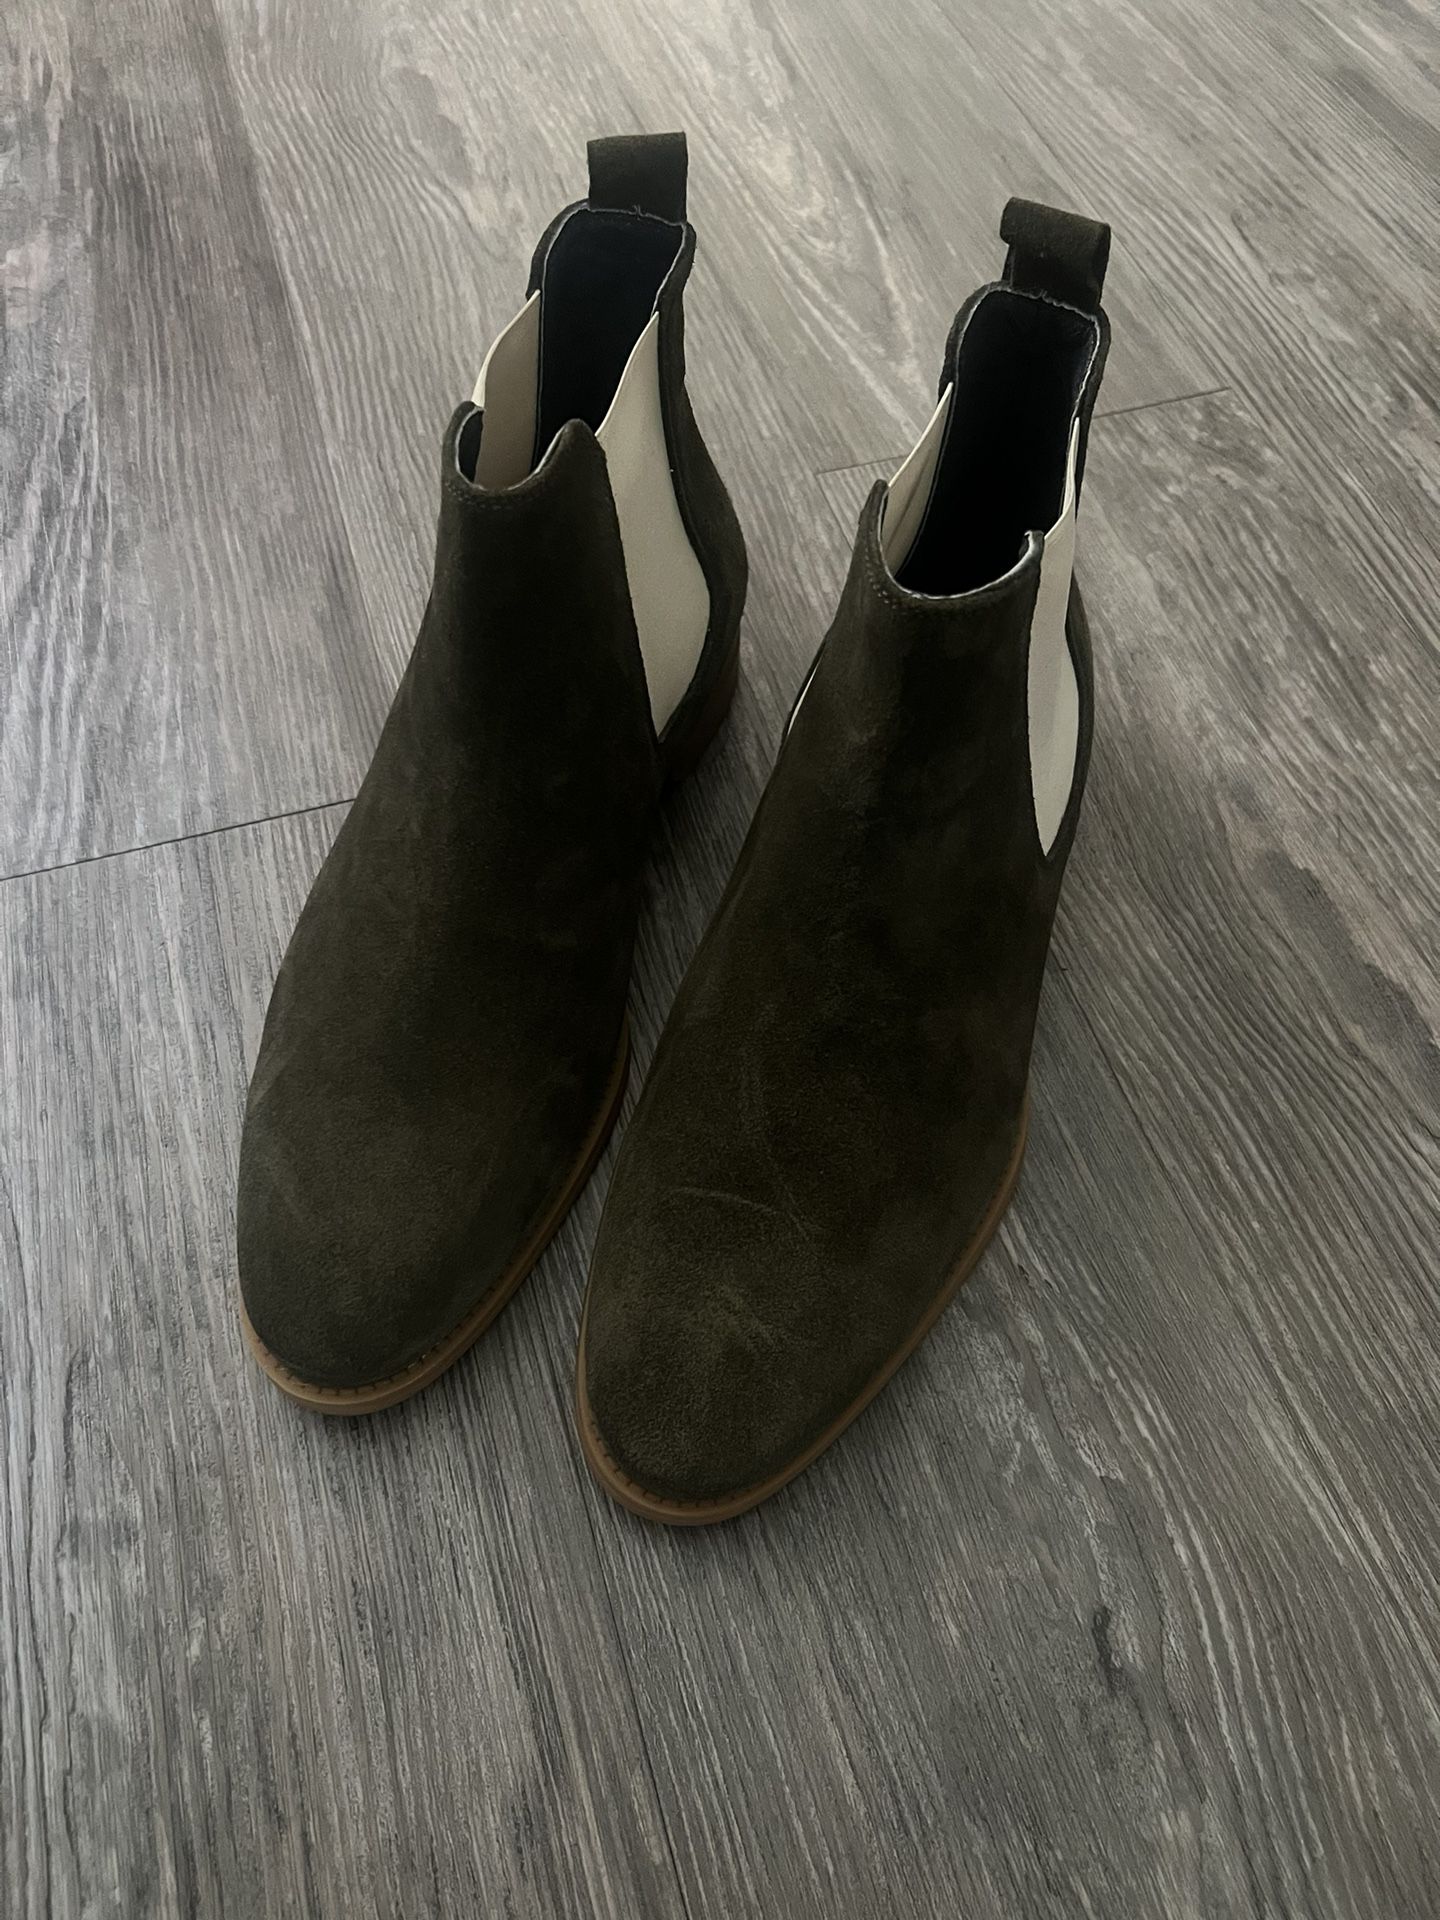 Leather Suede Green & Off White Chelsea Dress Boots 